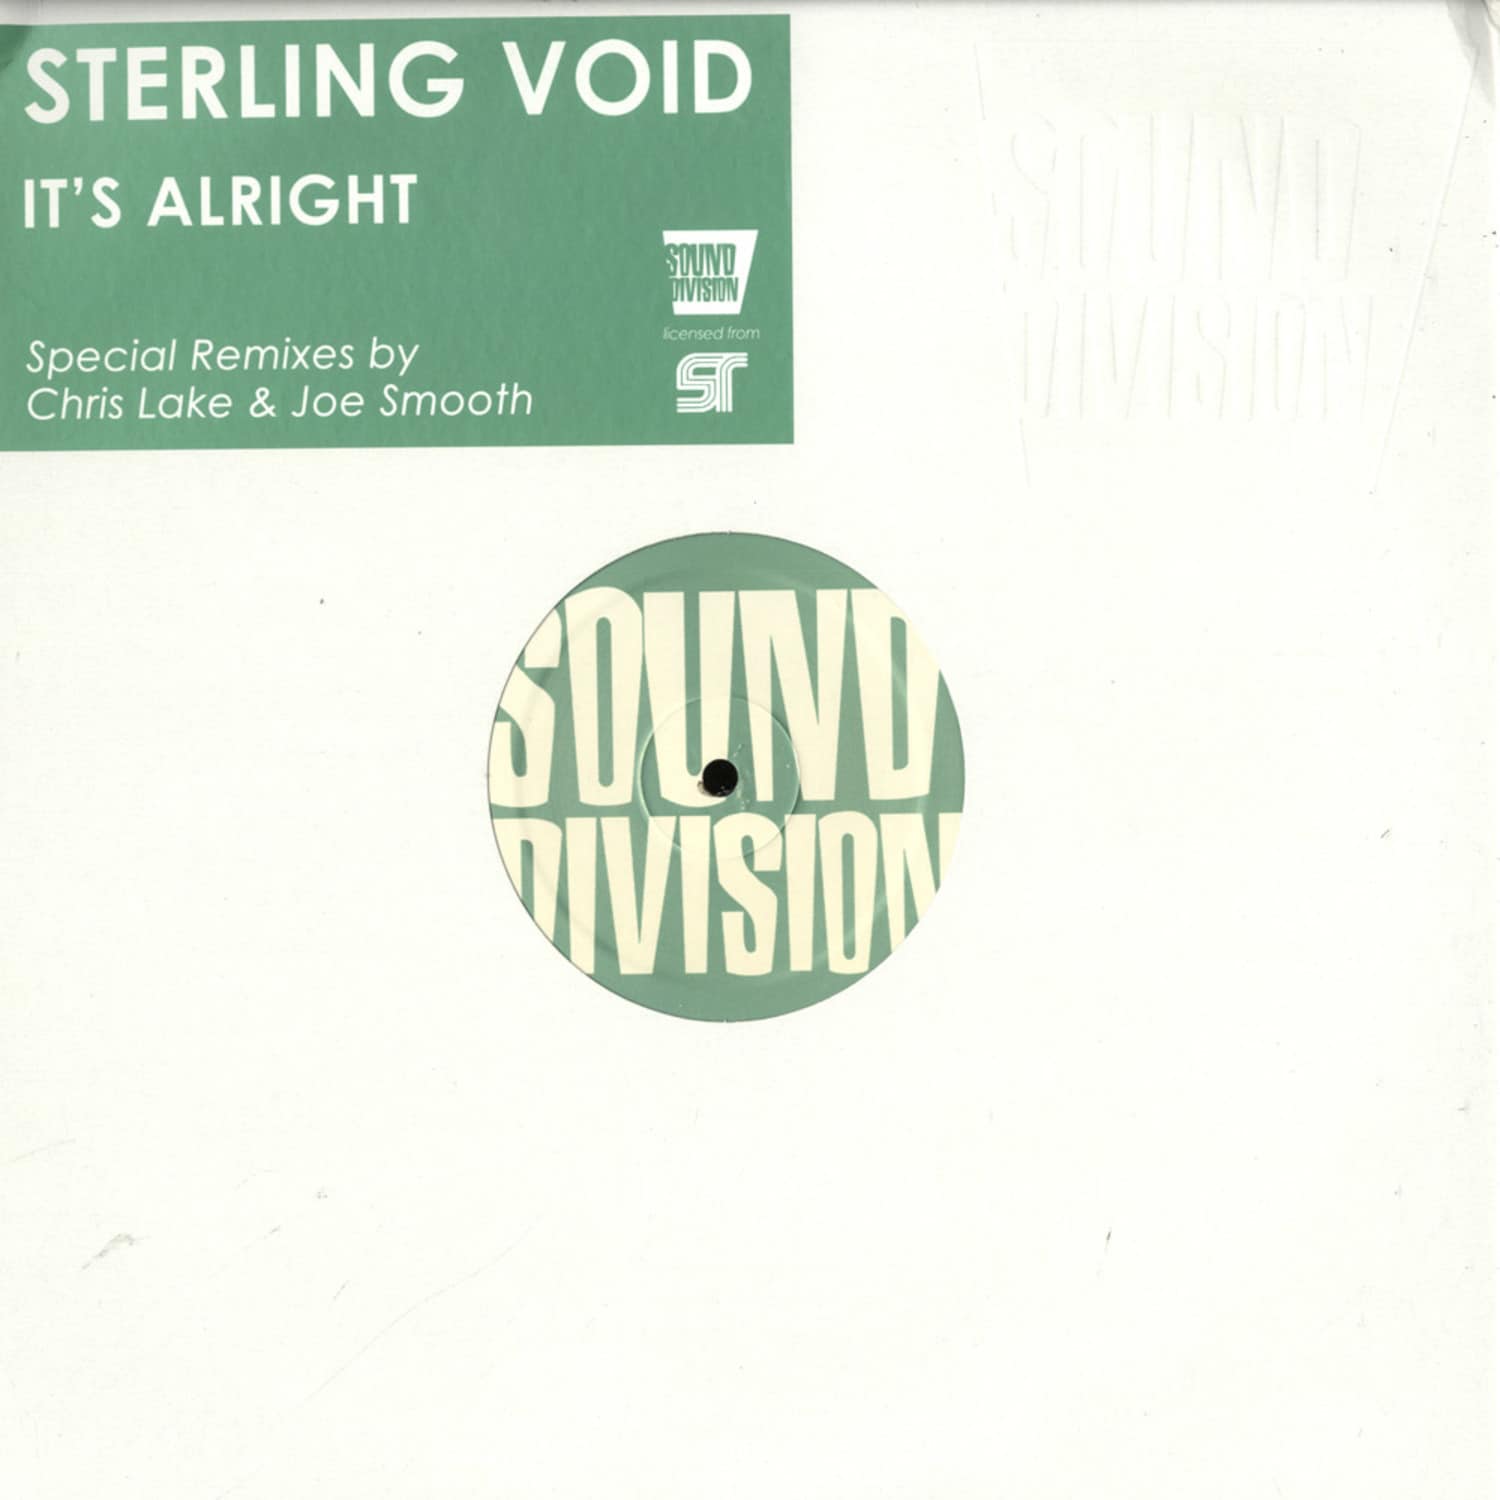 Sterling Void - ITS ALRIGHT